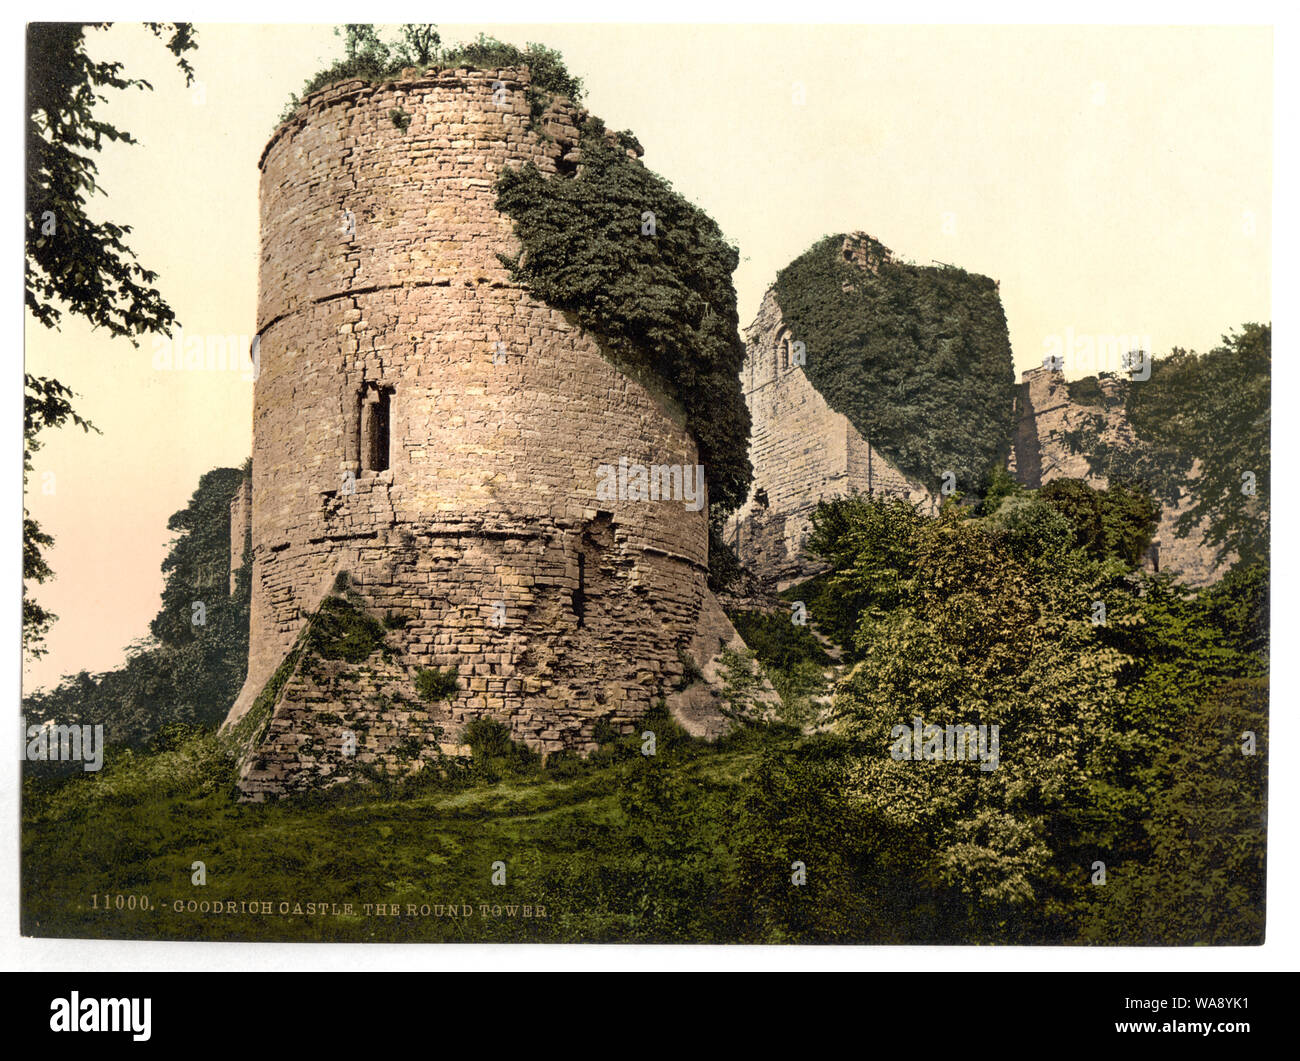 Castle, the round tower, Goodrich, England; Forms part of: Views of the British Isles, in the Photochrom print collection.; Print no. 11000.; Title from the Detroit Publishing Co., Catalogue J-foreign section, Detroit, Mich. : Detroit Publishing Company, 1905.; More information about the Photochrom Print Collection is available at http://hdl.loc.gov/loc.pnp/pp.pgz Stock Photo